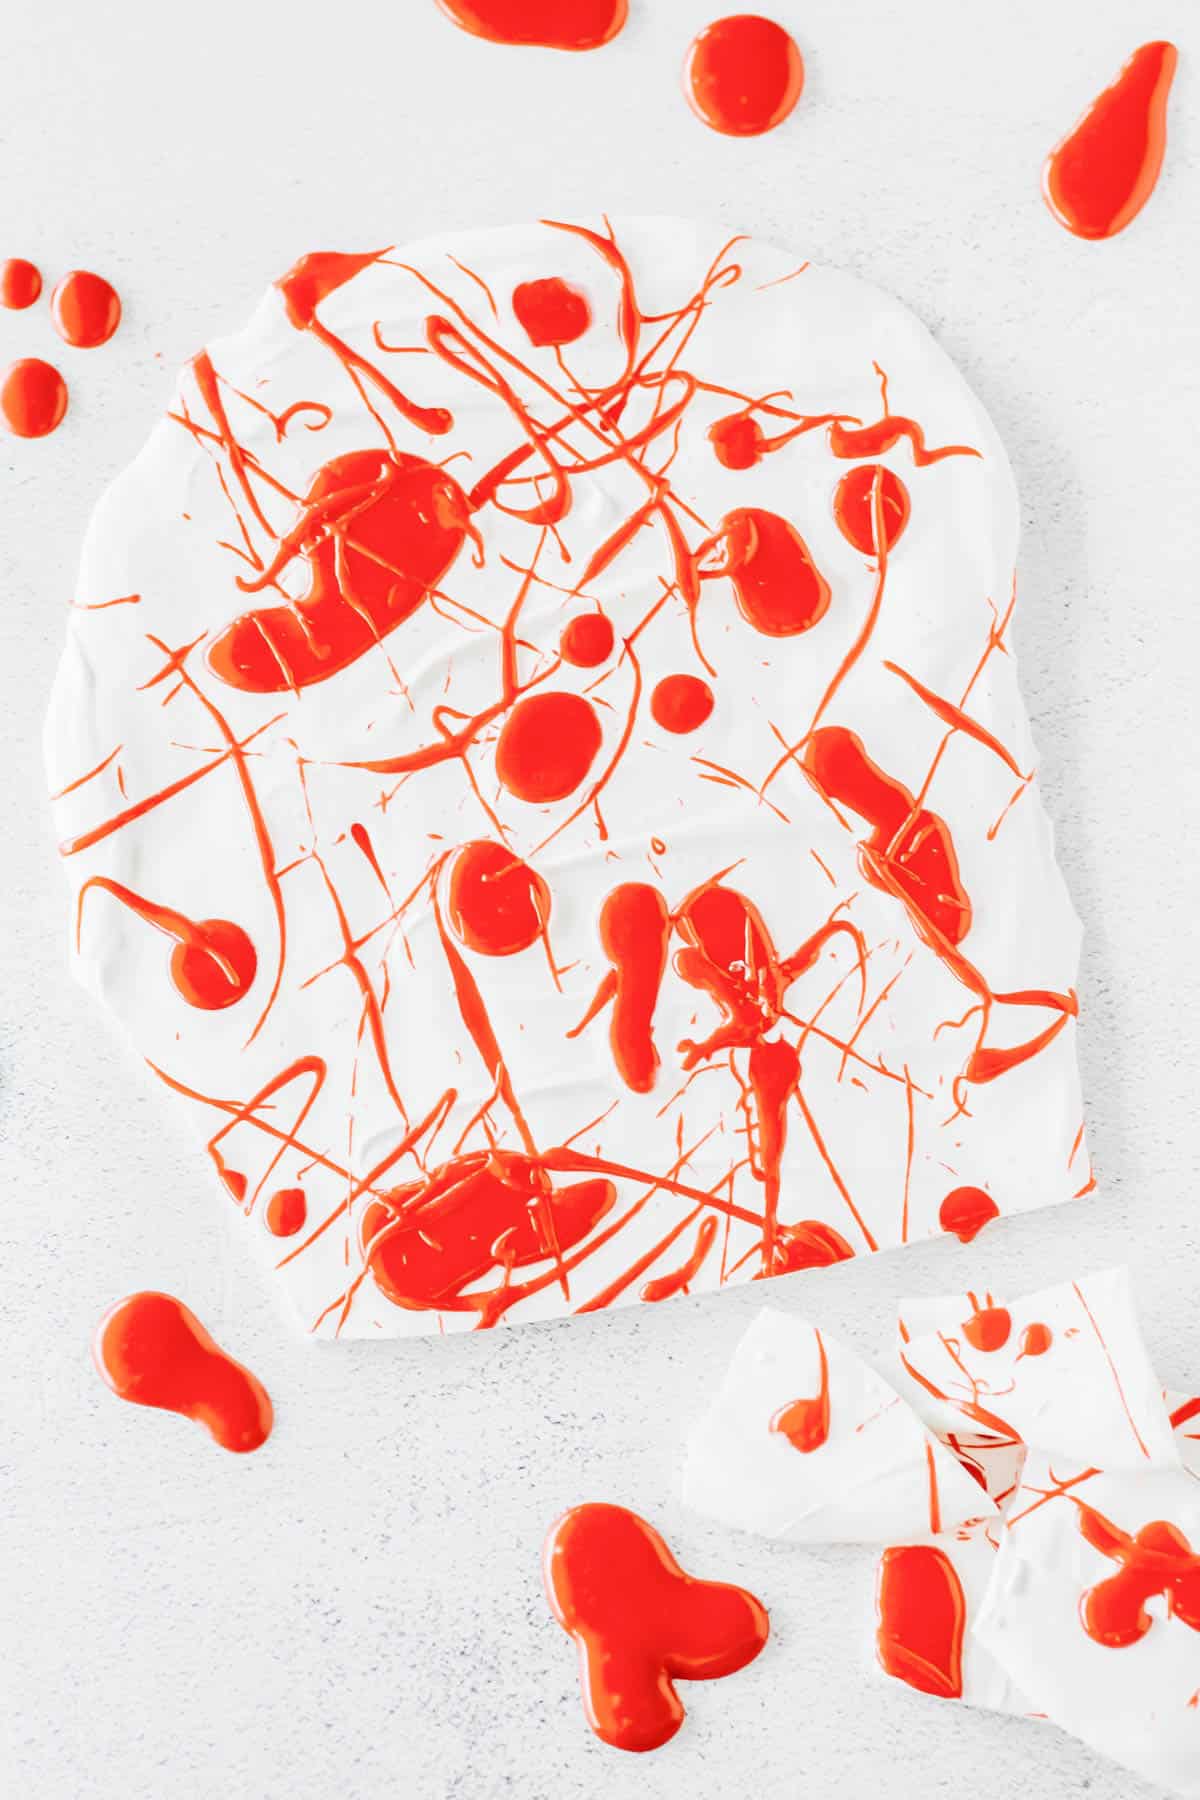 Hardened white chocolate bark on wax paper drizzled with red icing to look like blood splatters for a Halloween dessert.